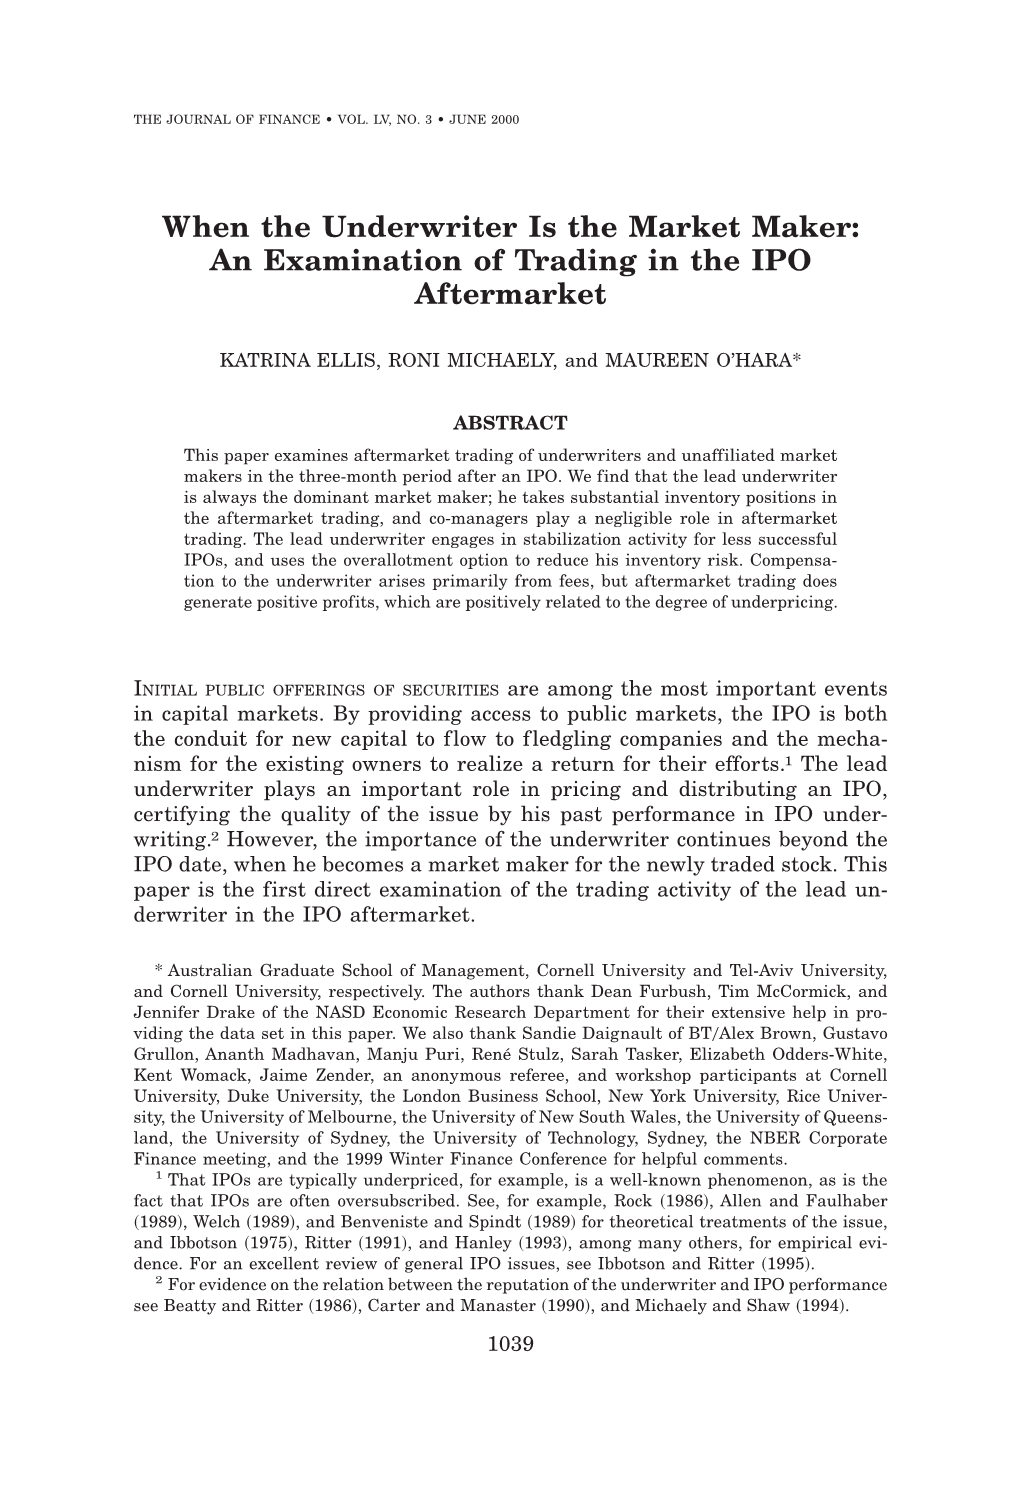 When the Underwriter Is the Market Maker: an Examination of Trading in the IPO Aftermarket